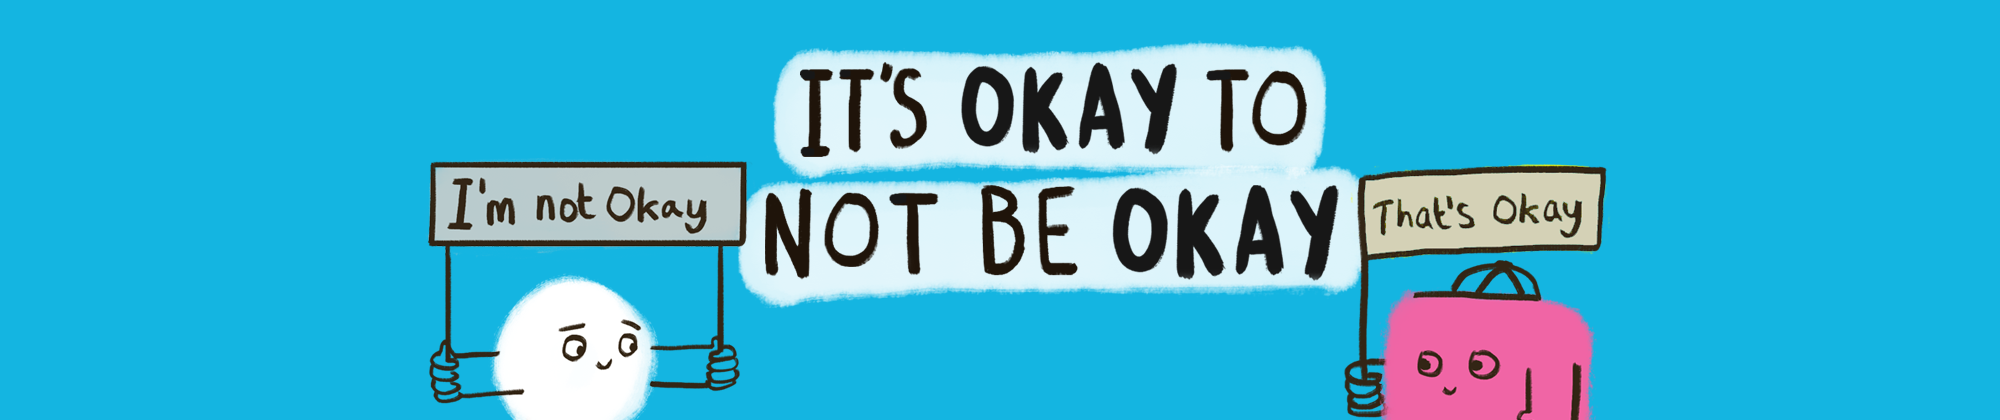 It's okay home page banner v2.png